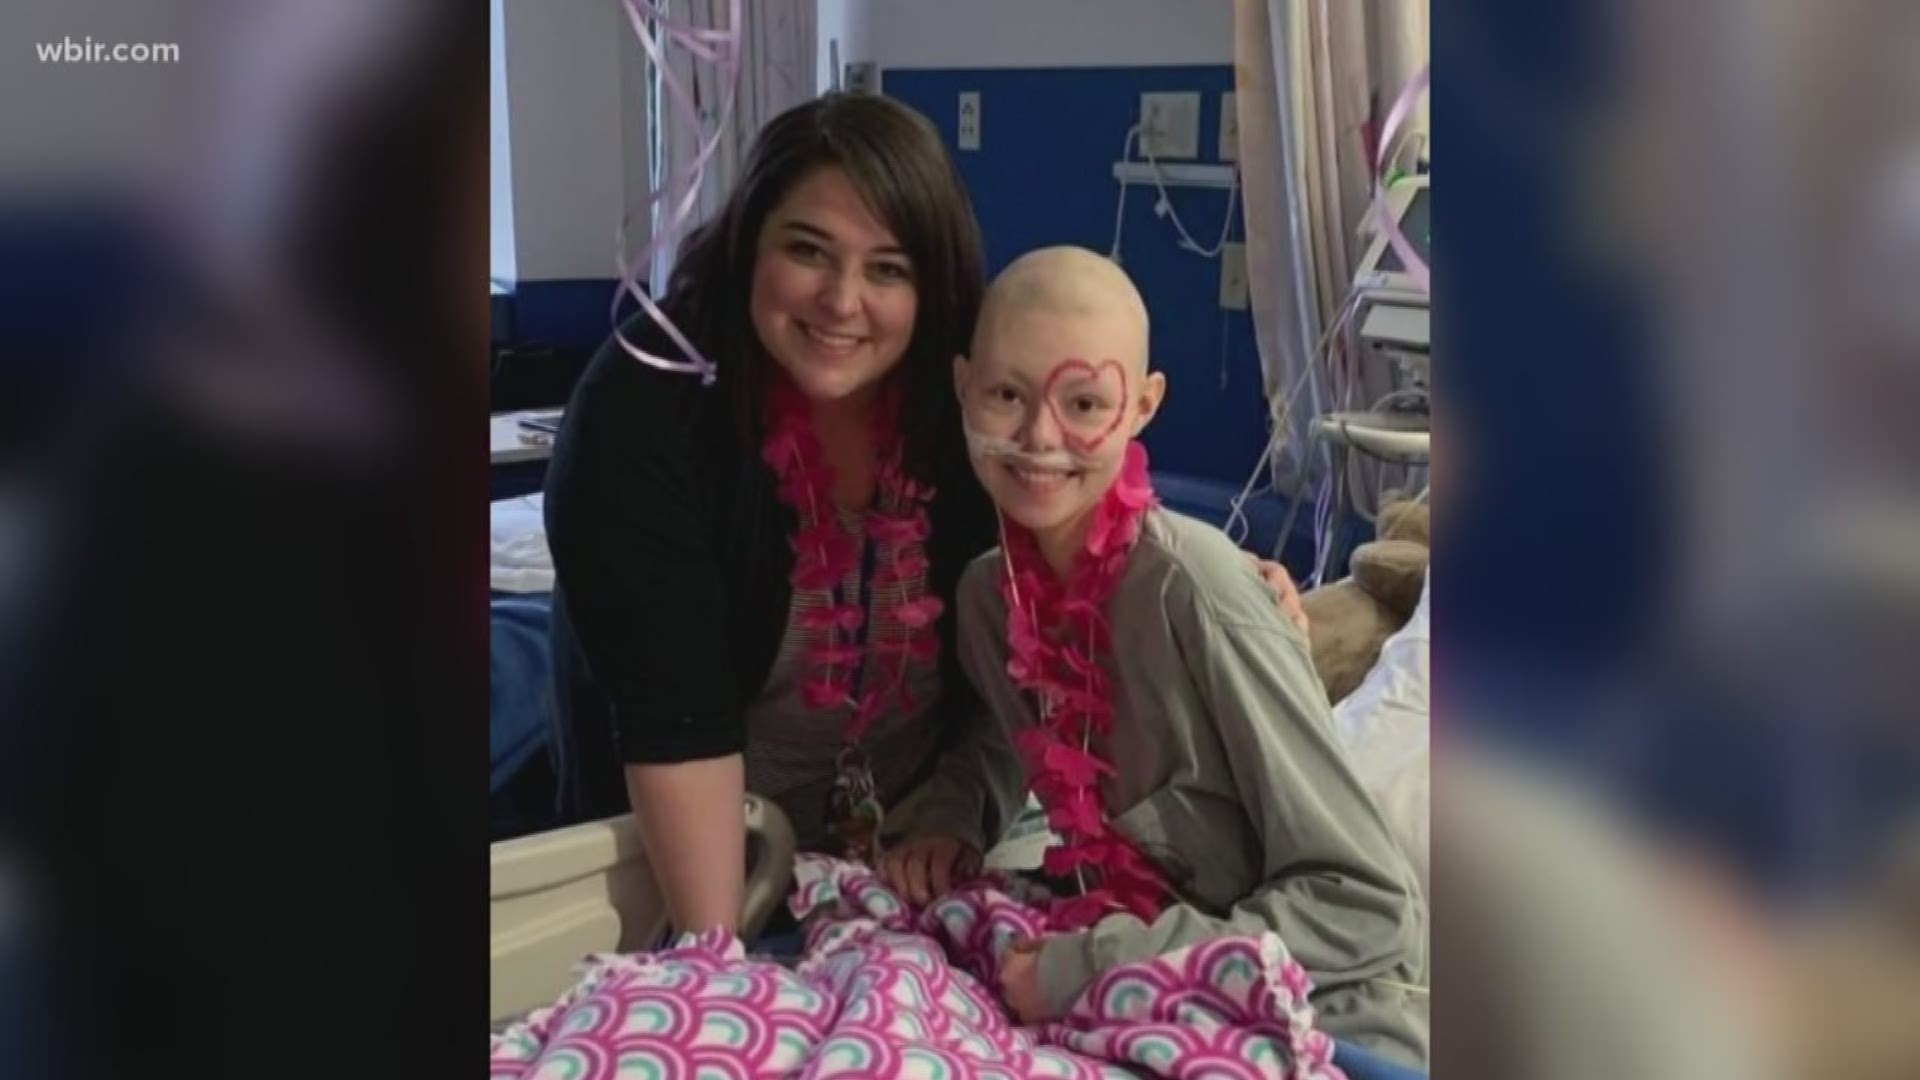 An East Tennessee Children's Hospital employee went above and beyond to make sure the teen's room was ready for a very big day.